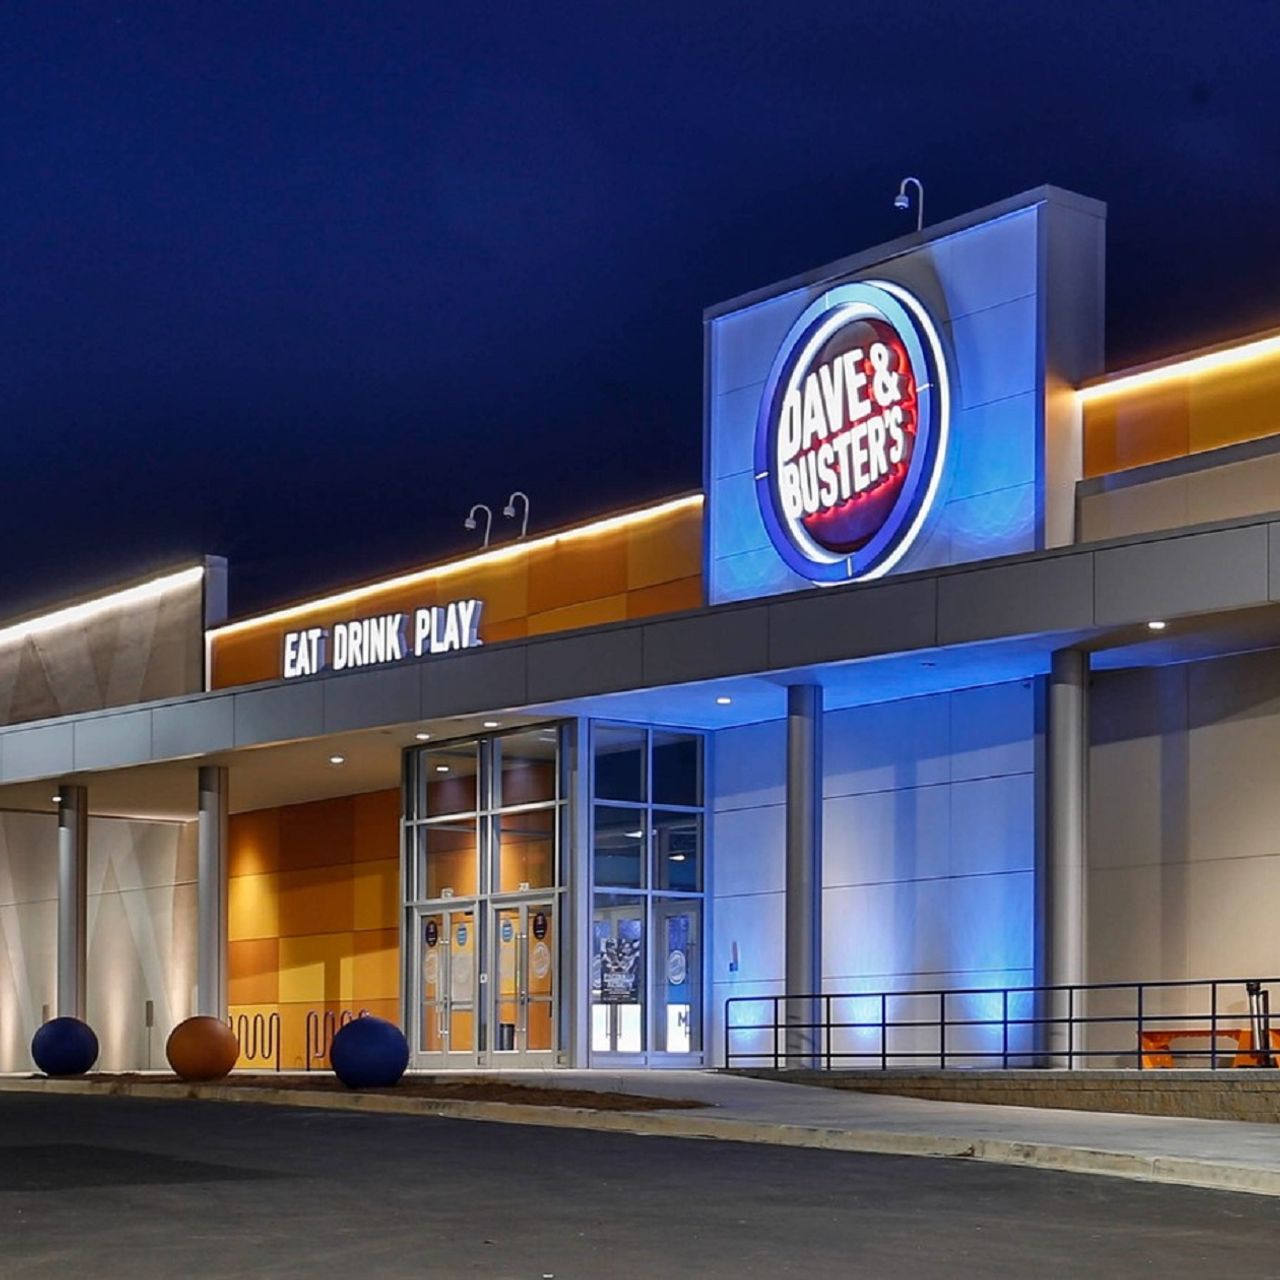 Dave and Buster's - Food and Drink - View our full menu